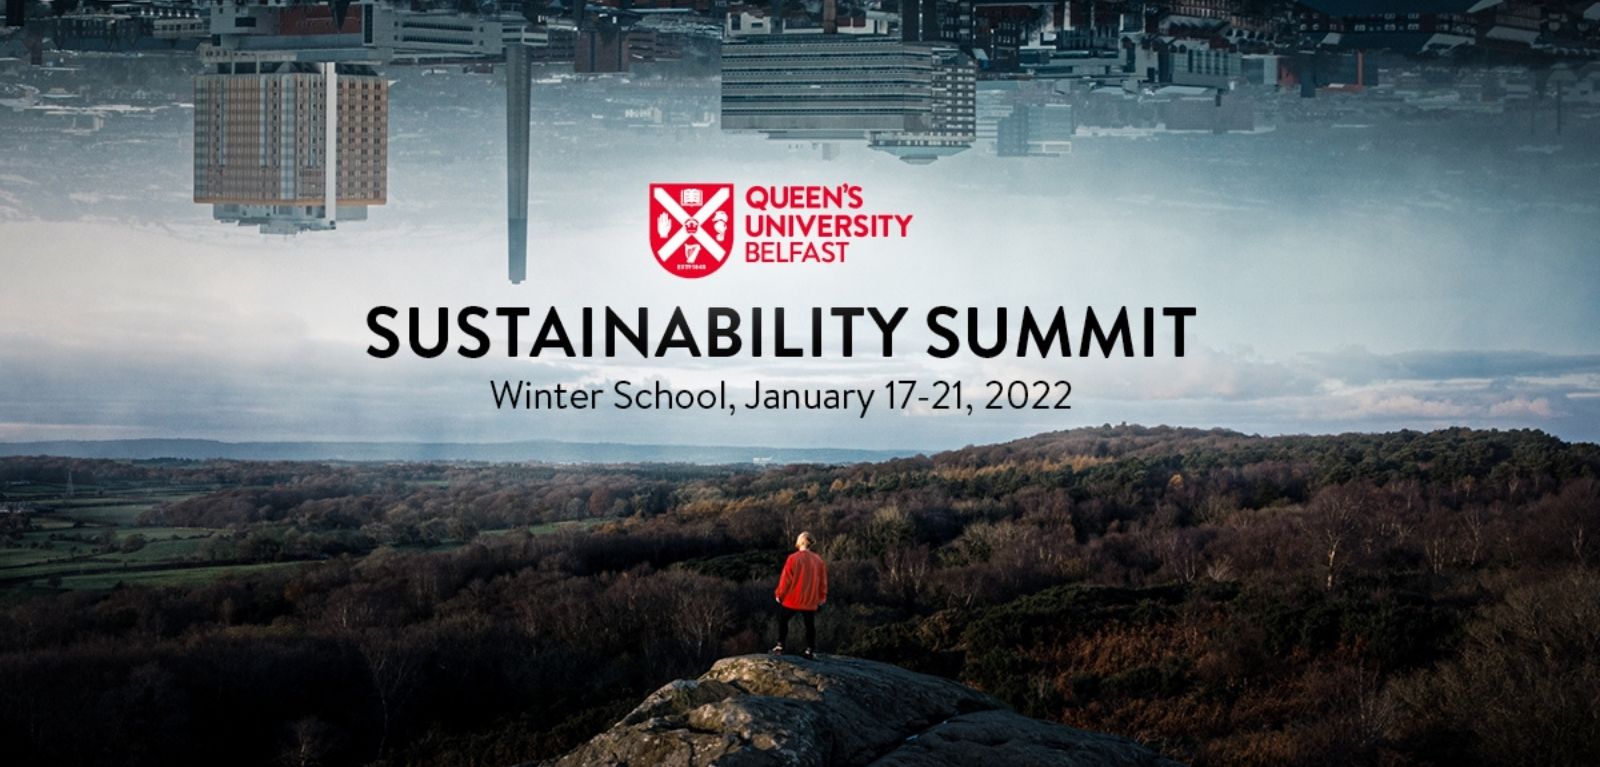 Sustainability summit banner image of a world turned upside down